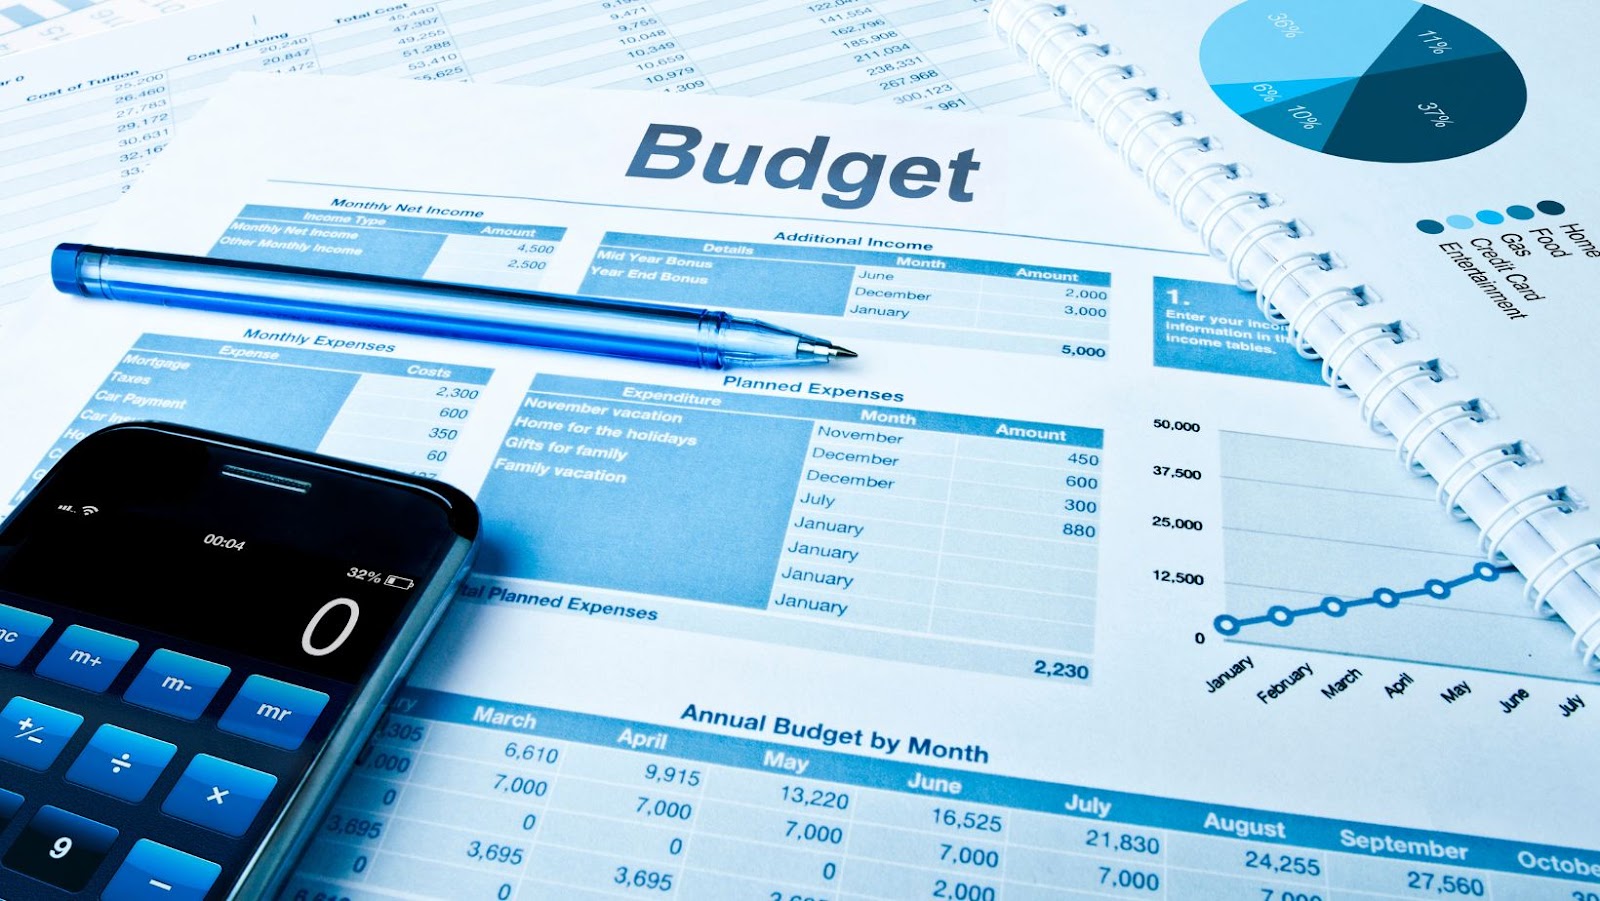 Using NPV in Capital Budgeting